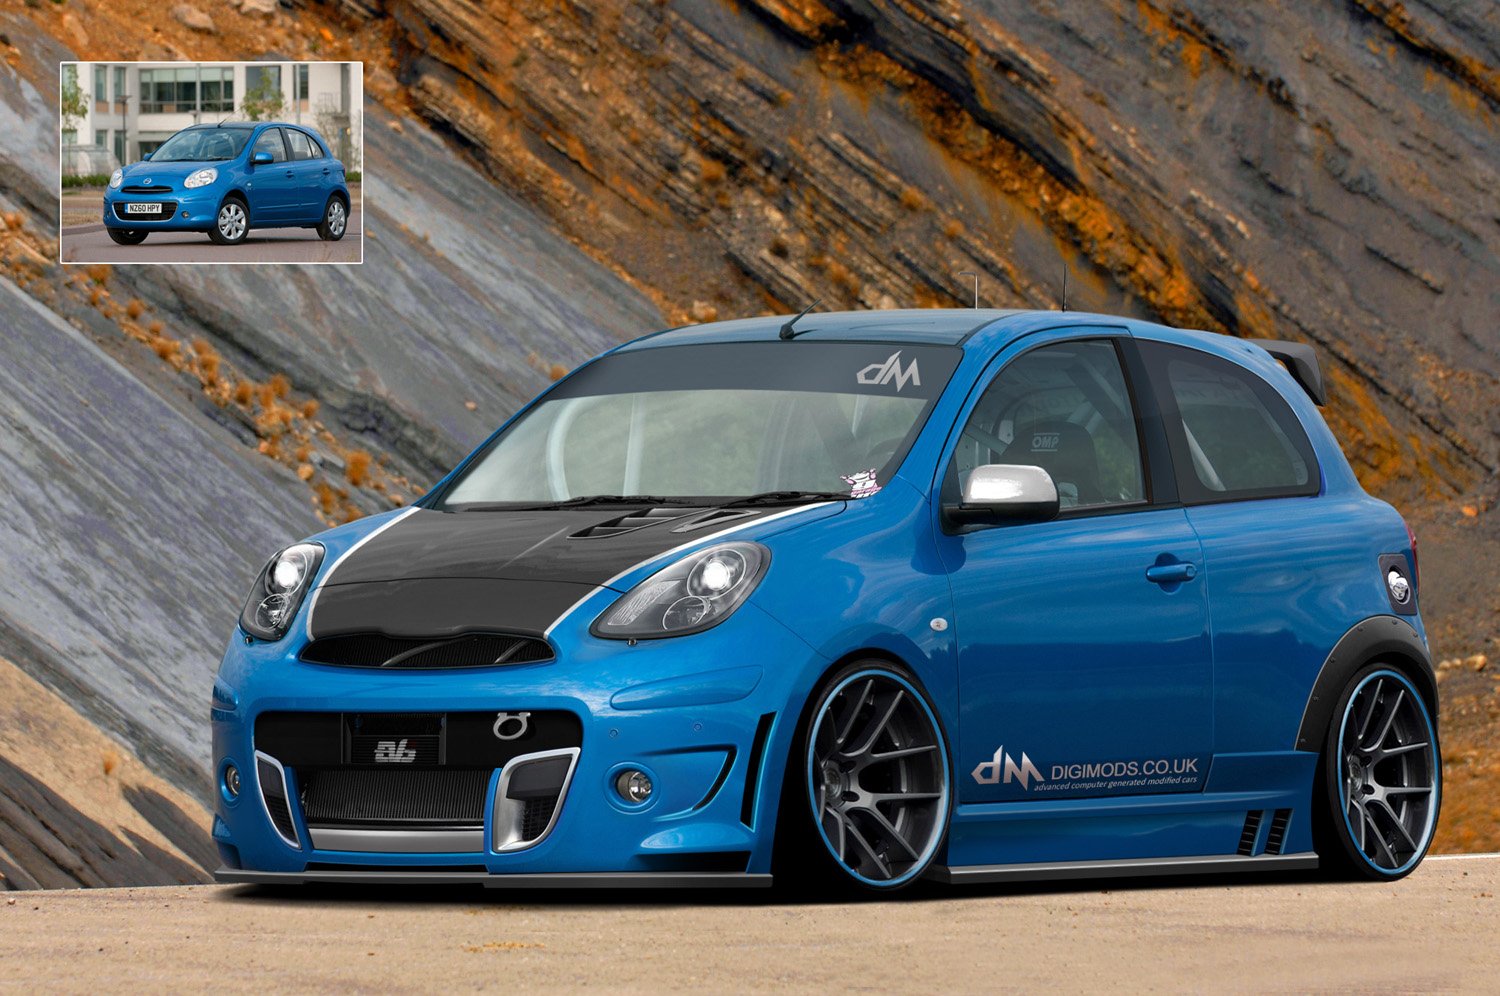 K tuning. Nissan Micra Nismo. Nissan March Tuning. Nissan Micra k13. Nissan Micra k10 Tuning.